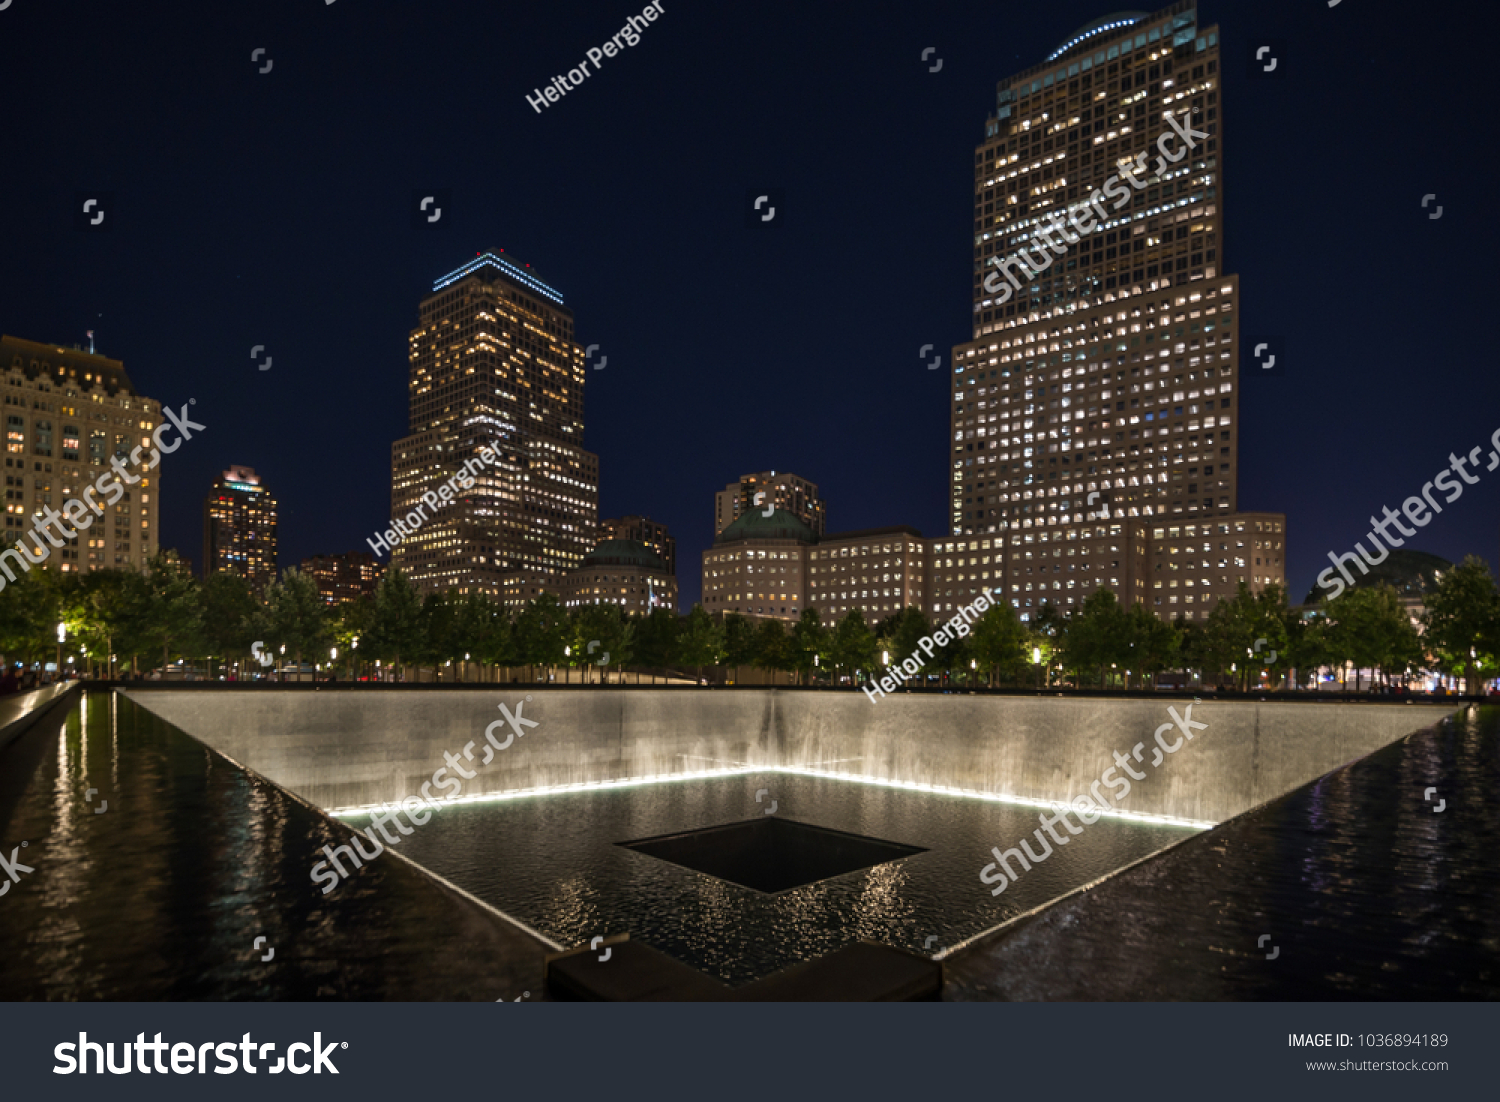 9 11 memorial shot at night with building in the back #1036894189